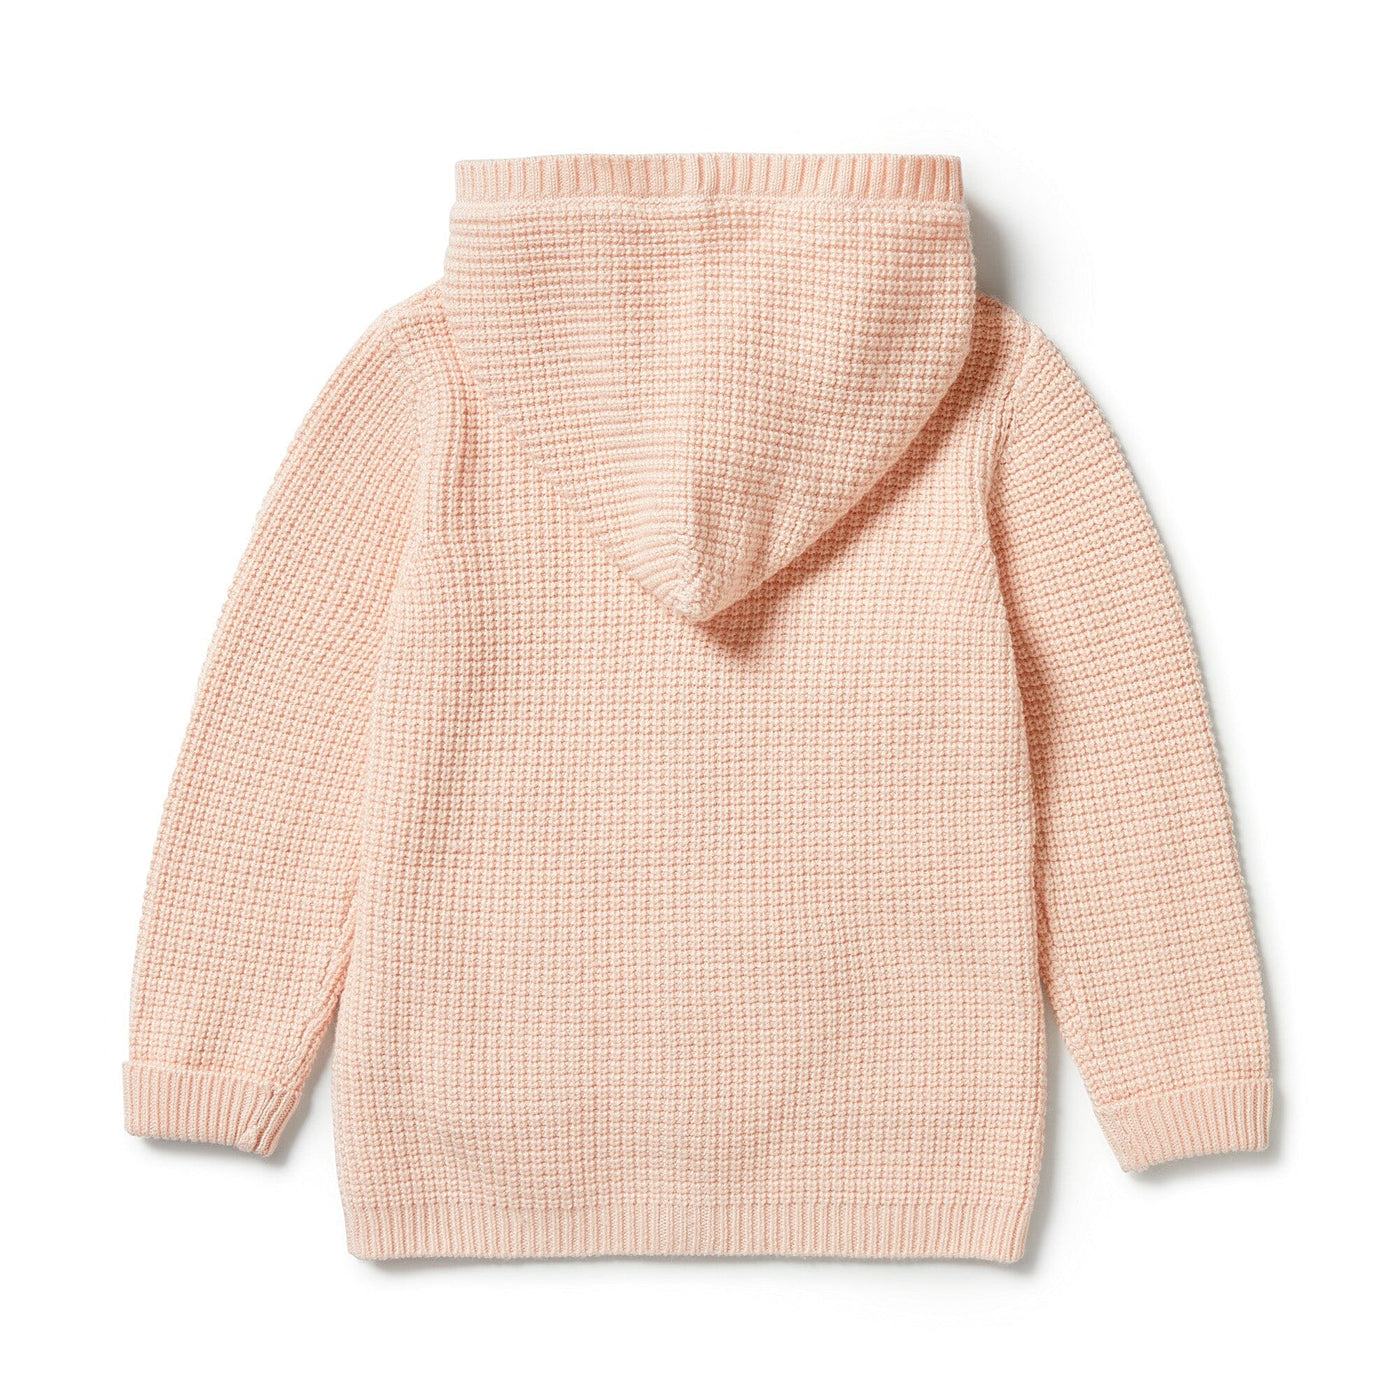 Knitted Button Jacket - Blush Jacket Wilson & Frenchy 